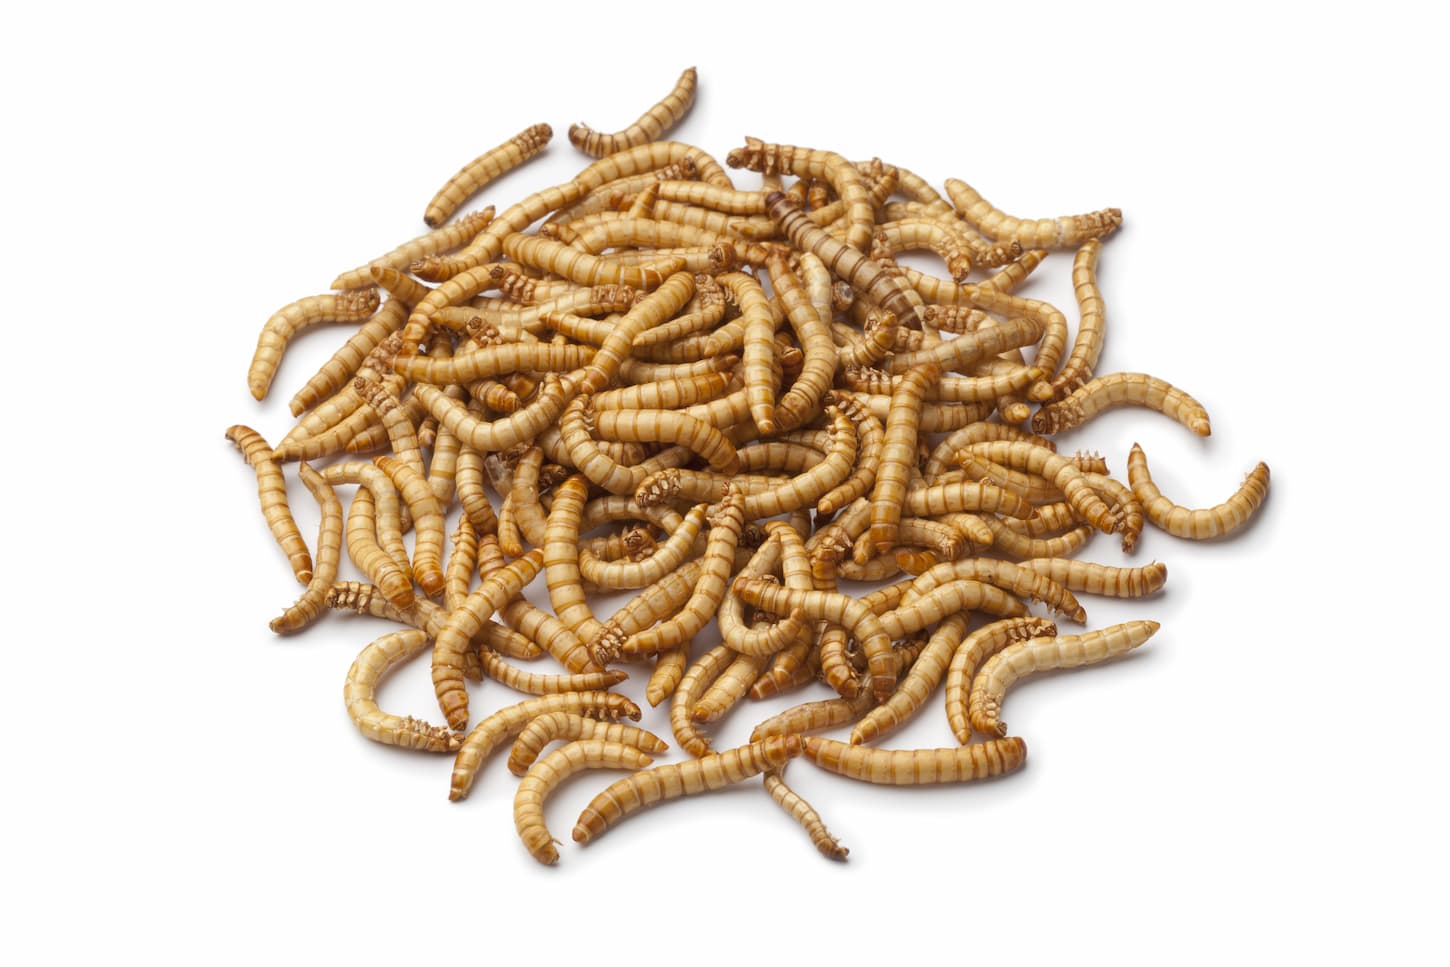 An image of a dried mealworm larva on a white background.